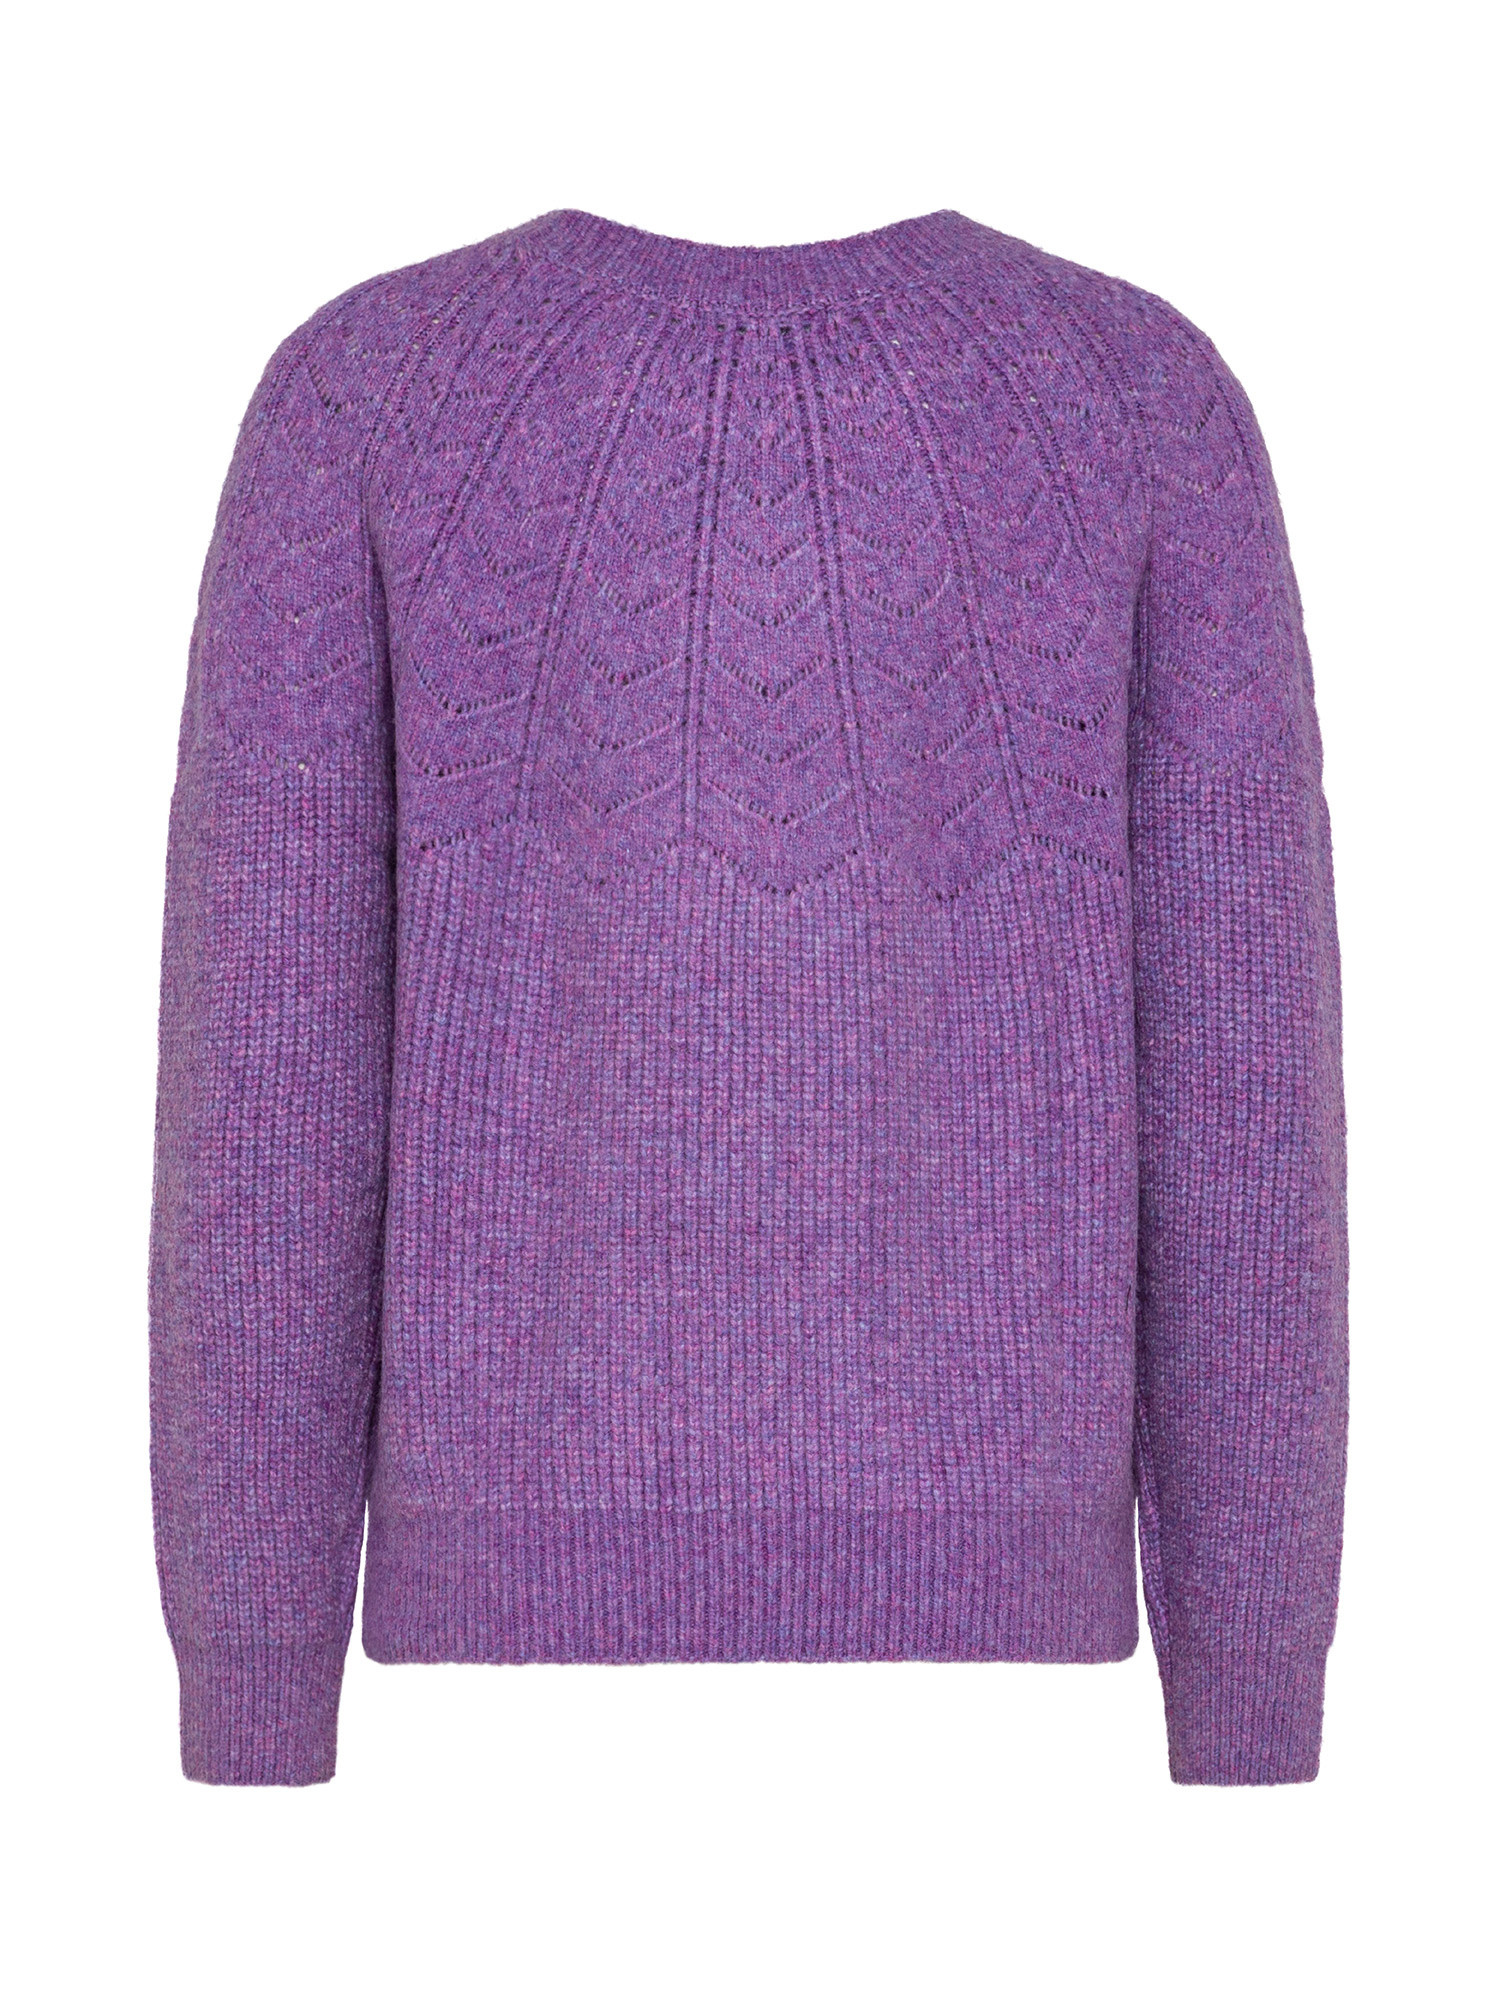 Koan - Ribbed pullover with ajour stitch, Purple Lilac, large image number 1